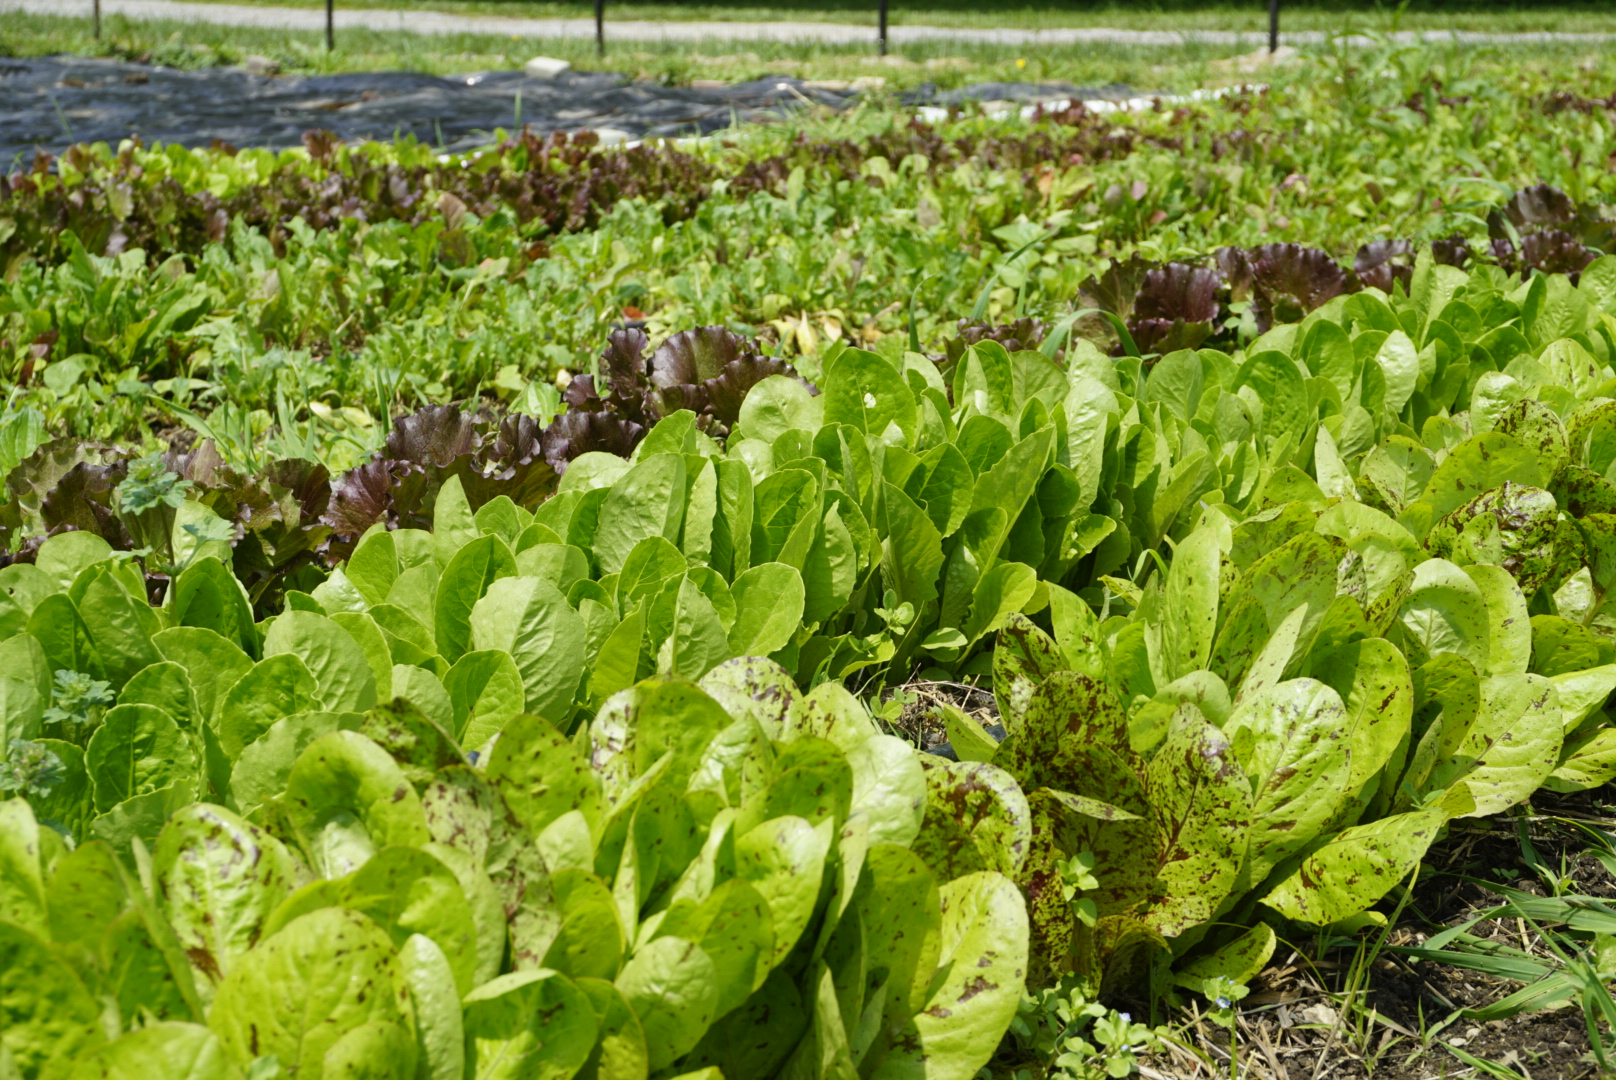 A patch of the garden is covered in lettuce plants of many varieties.